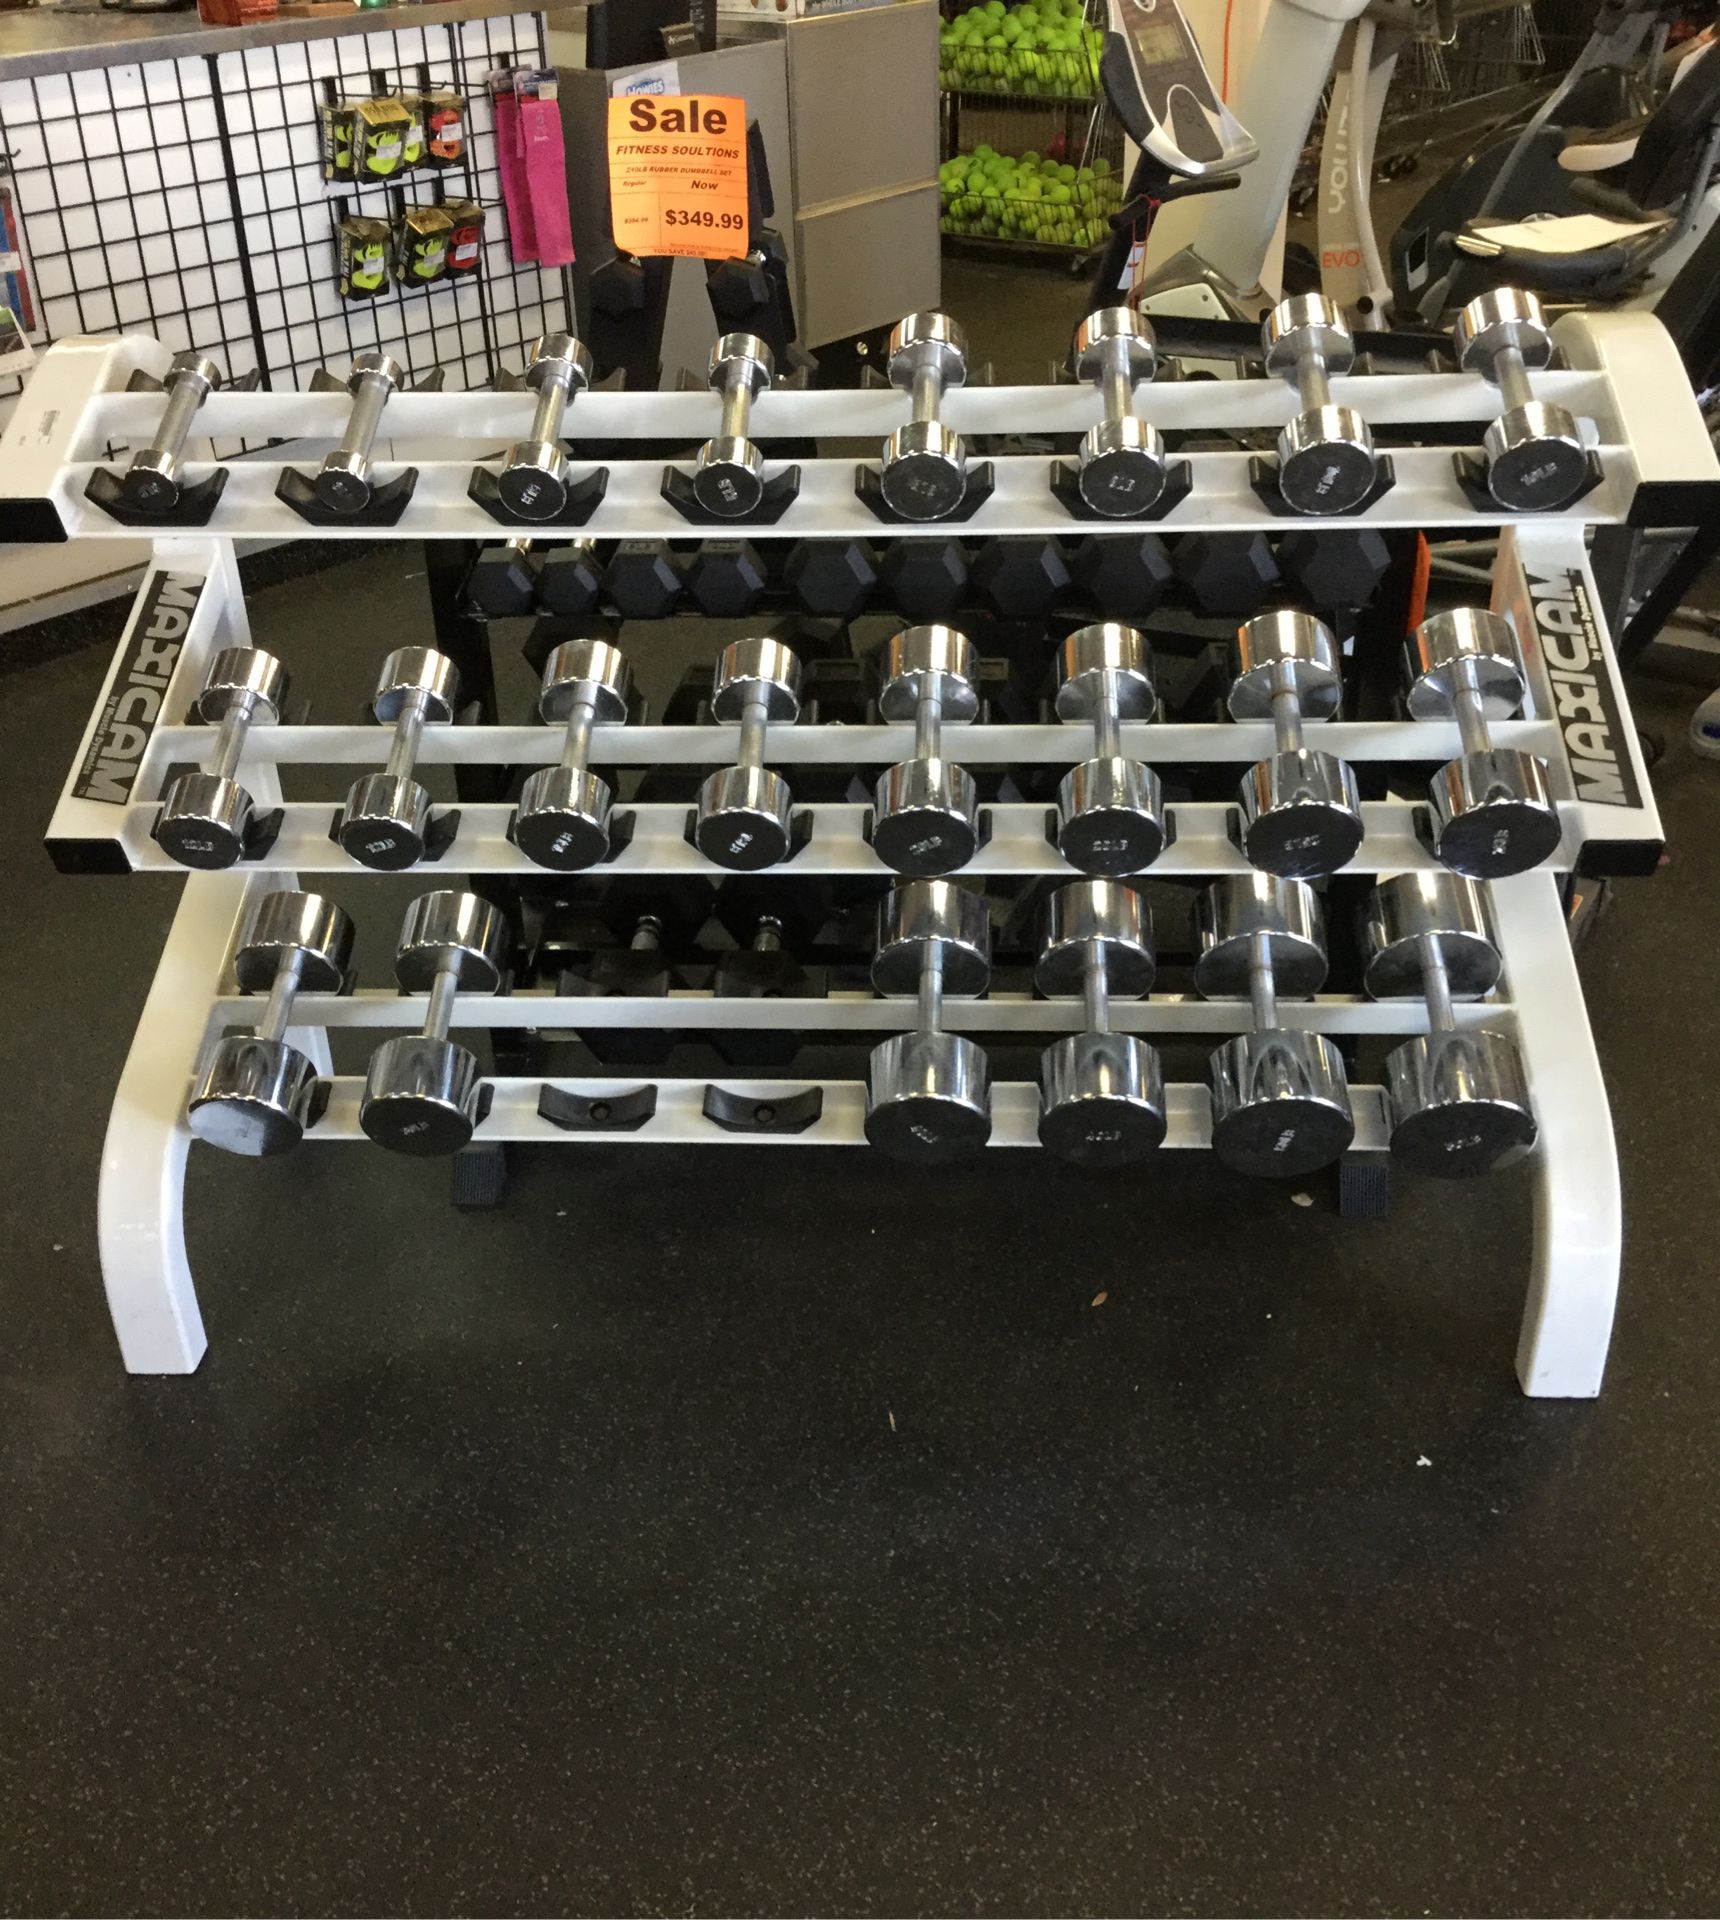 Dumbbell set with rack